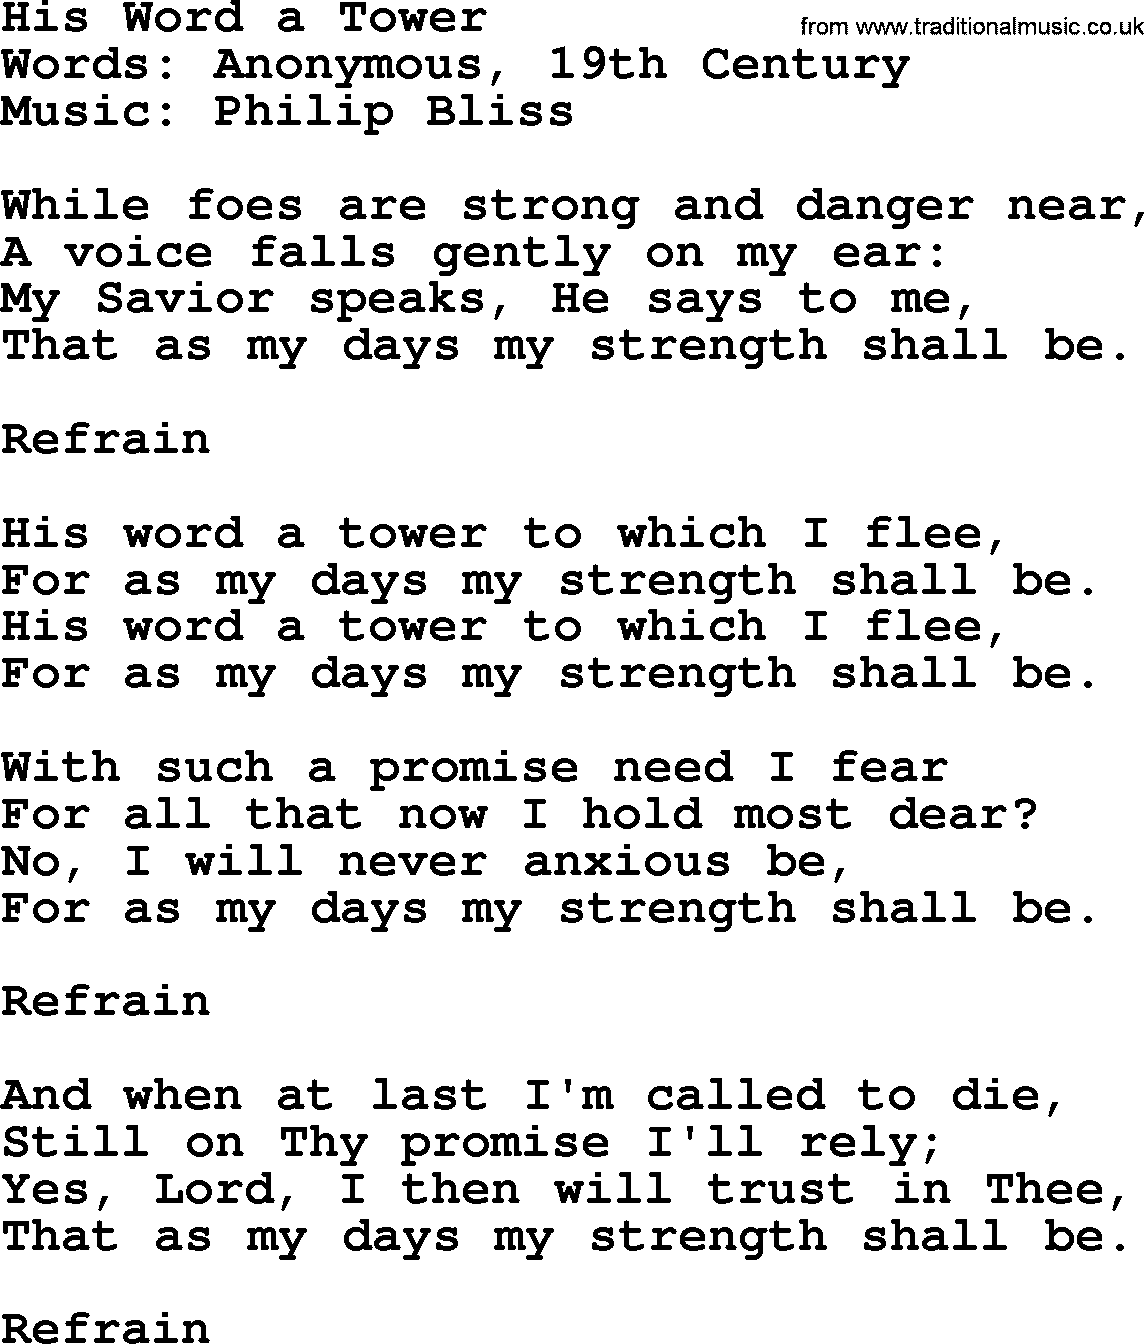 Philip Bliss Song: His Word A Tower, lyrics